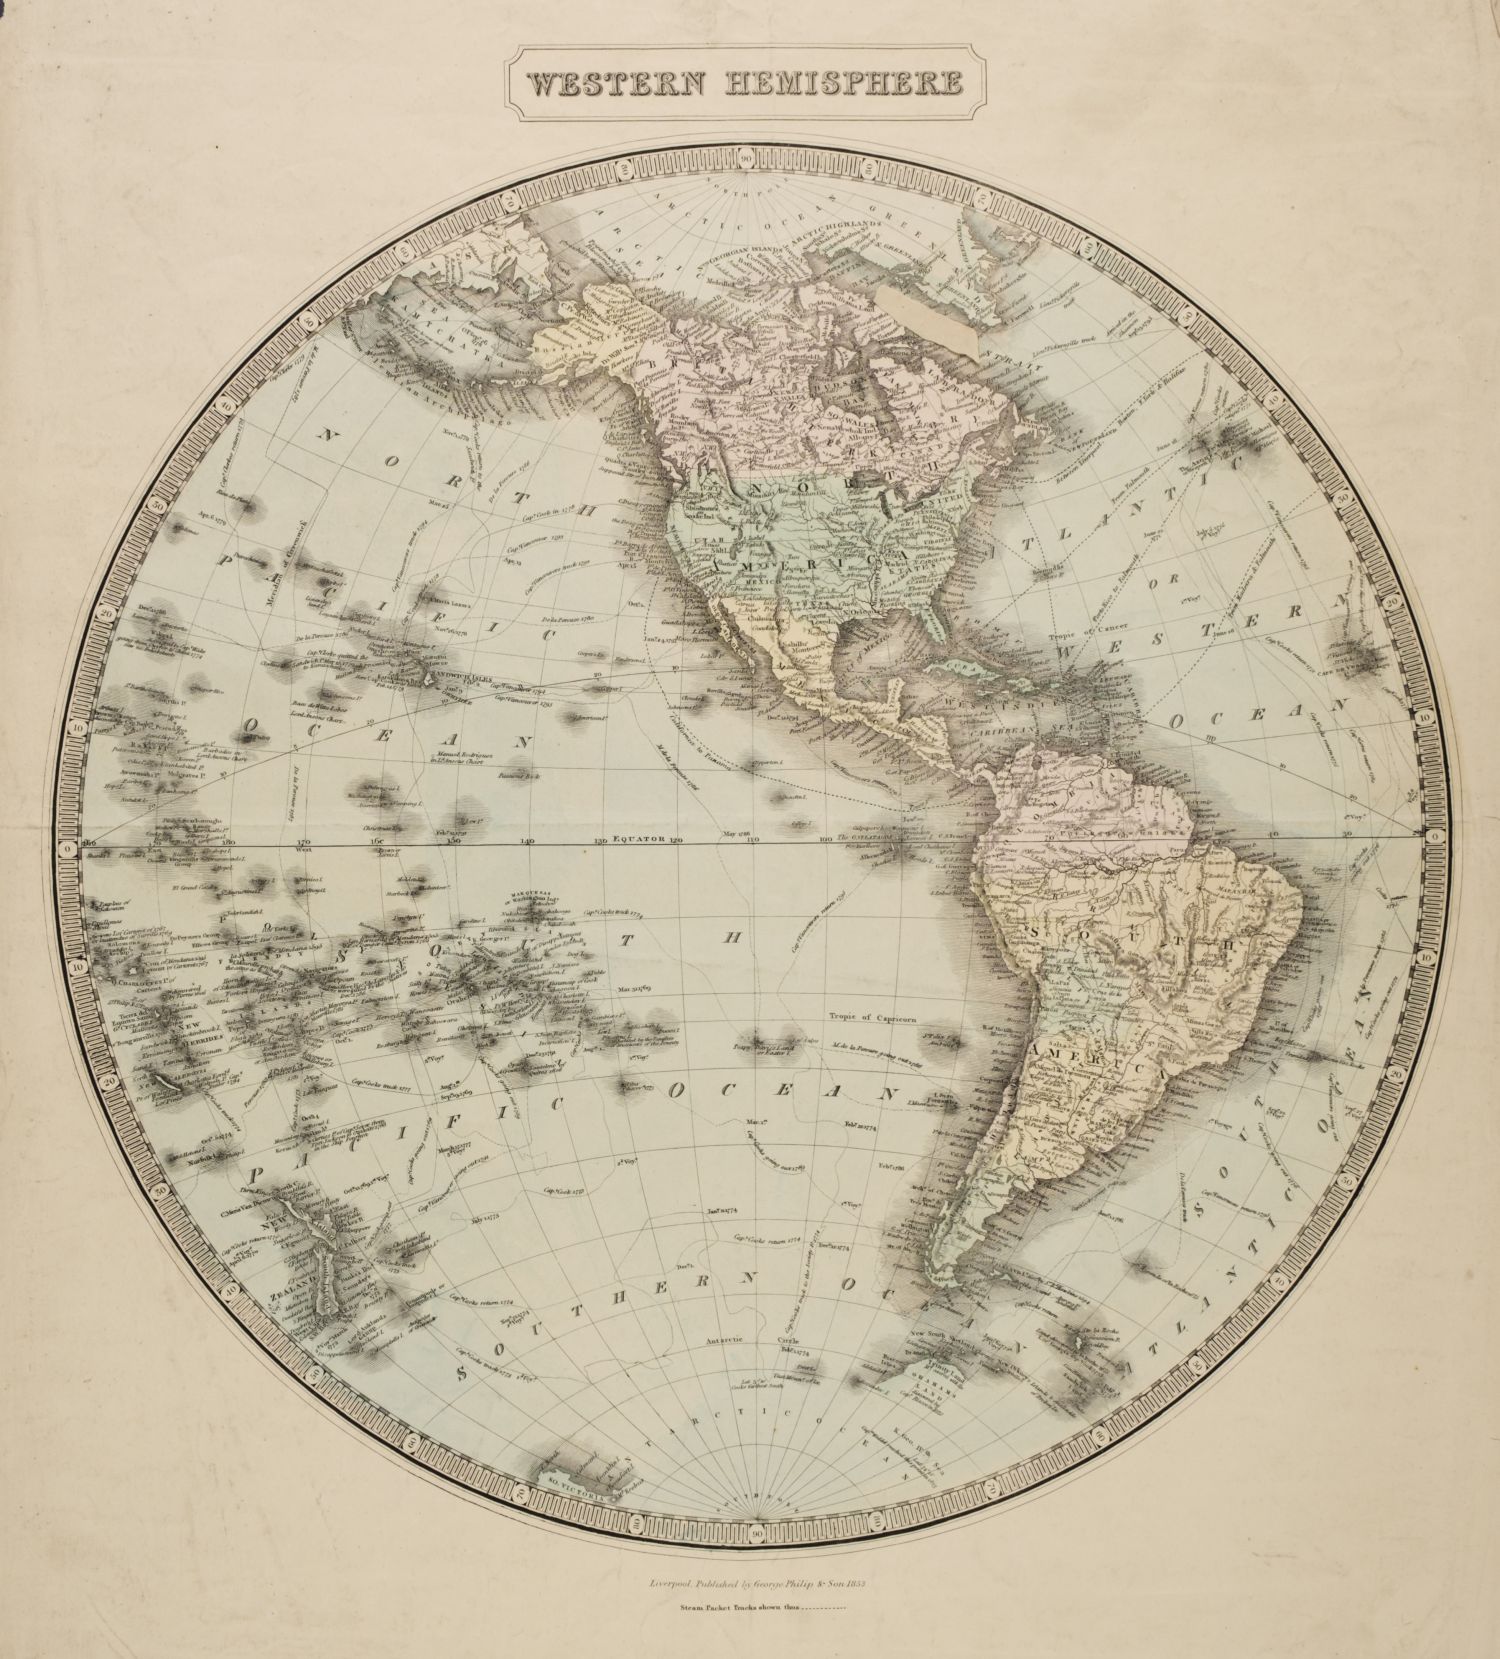 Philip (George & Son, publishers). North and South Poles & East & West Hemisphere, 1853